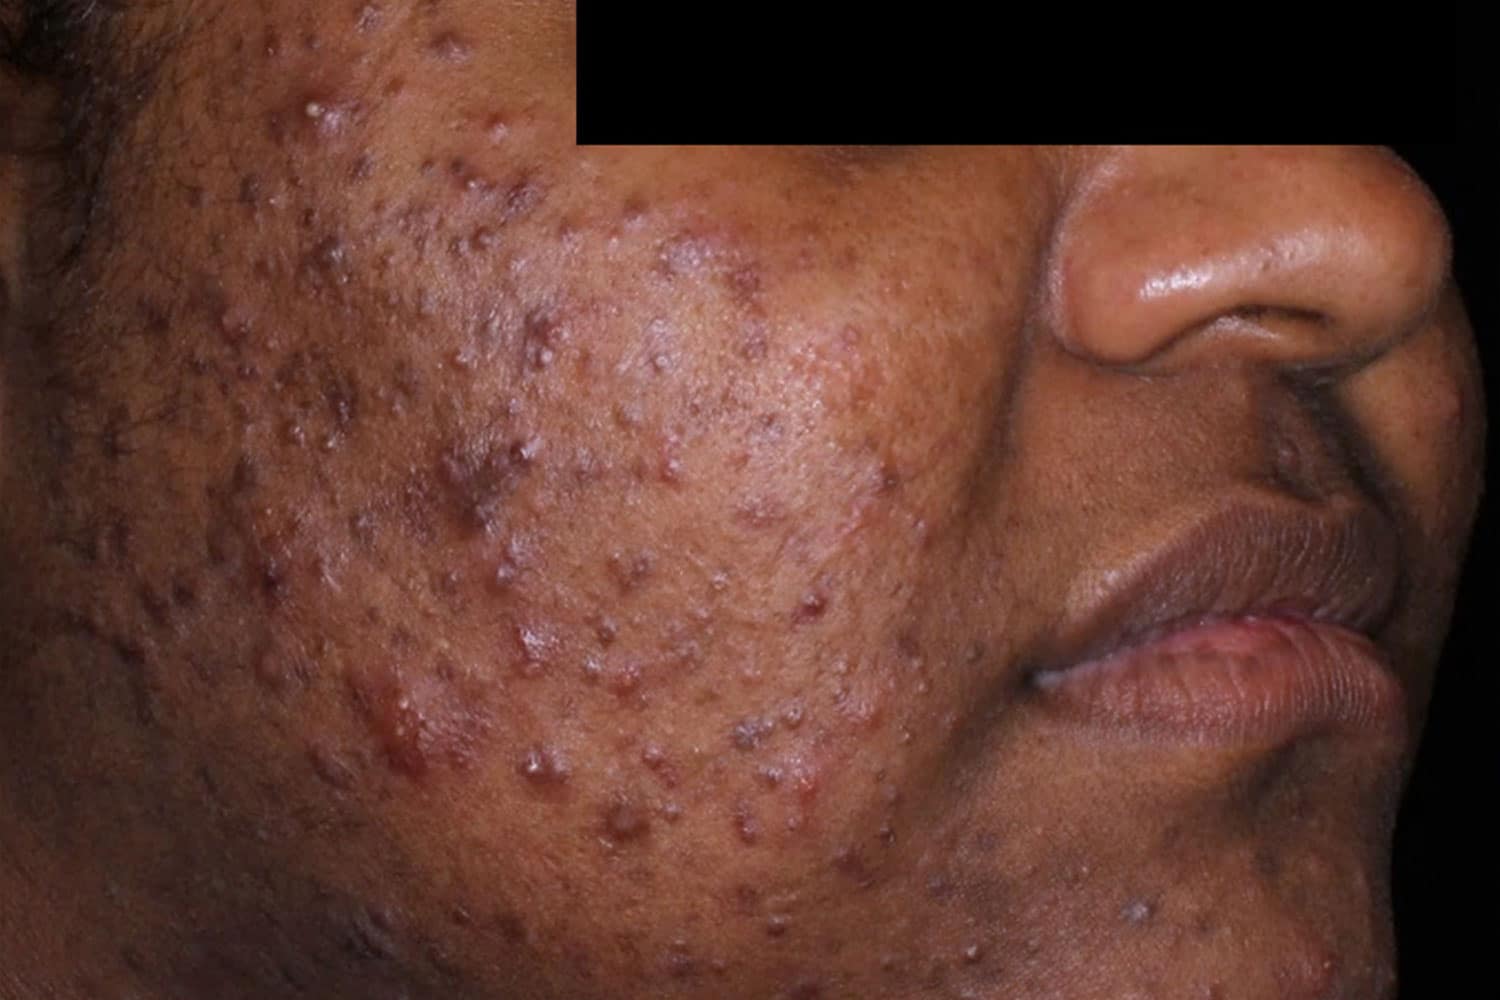 A close up photo of a person's cheek with severe acne prior to AviClear treatment